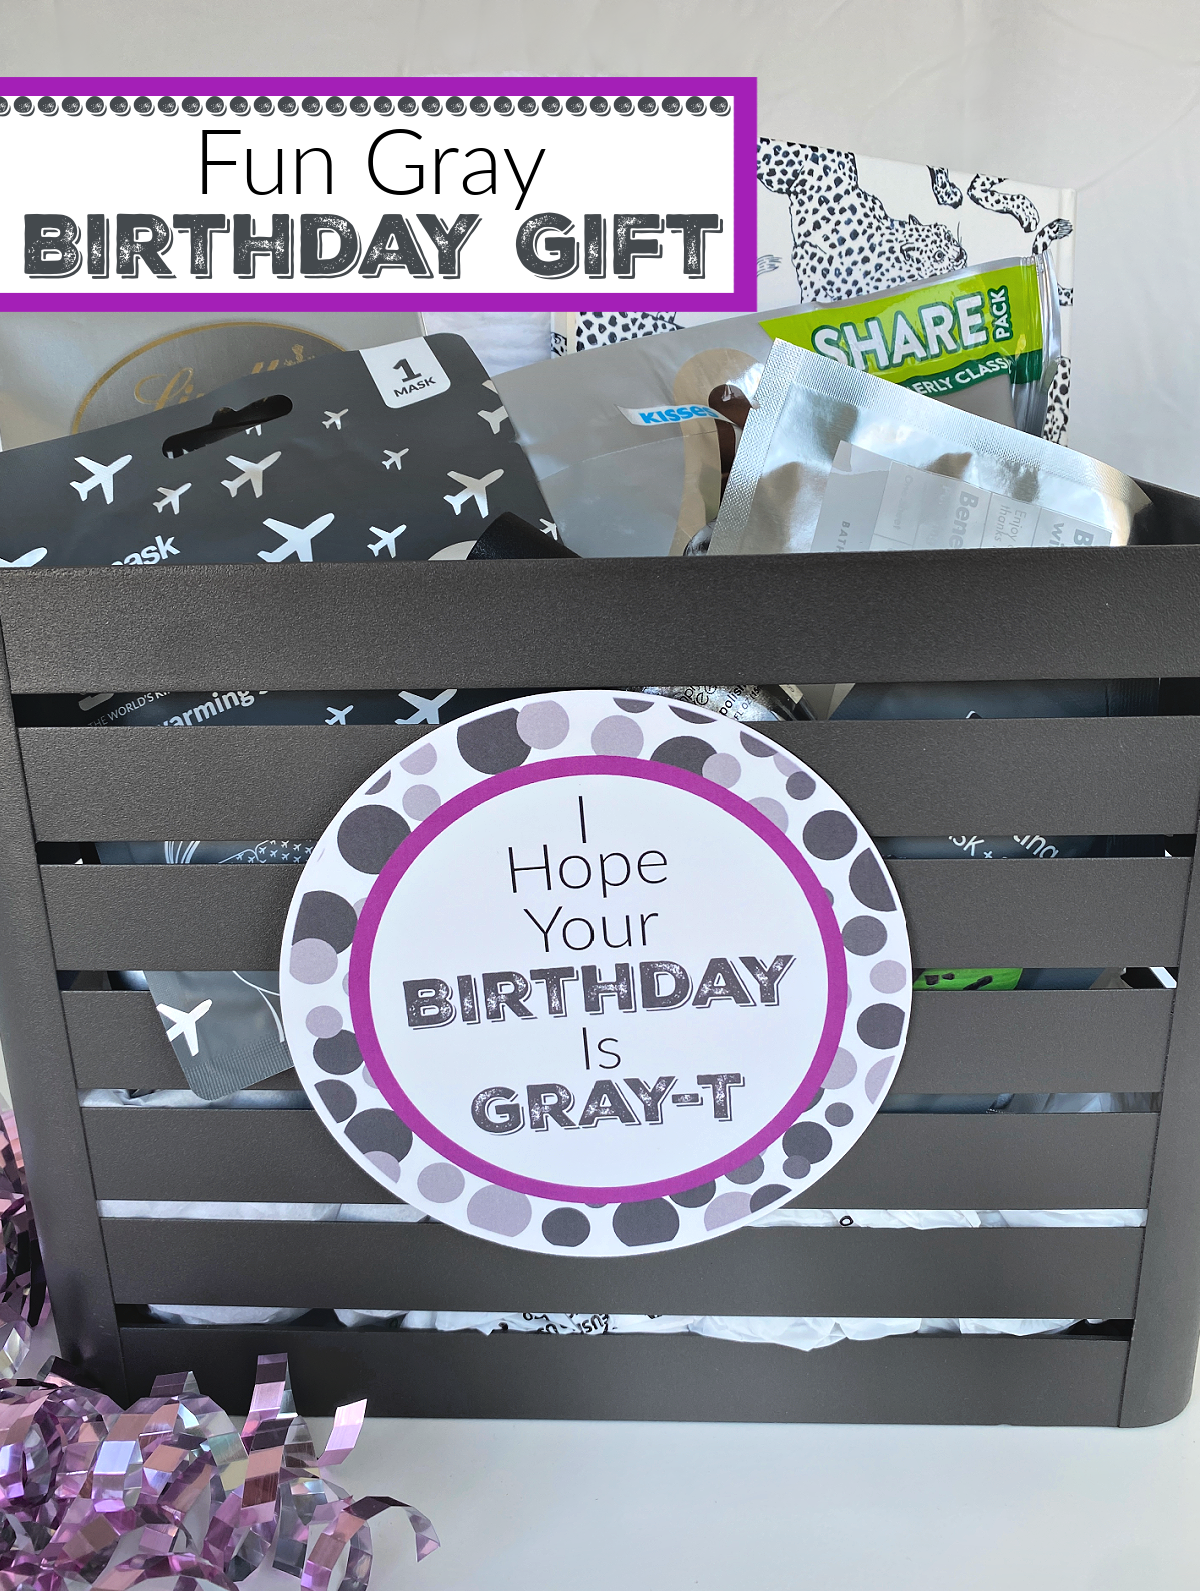 Fun Birthday Gift. This gray themed gift is the perfect friend gift, or for anyone who loves gray. #fungift #graygift #fungiftidea